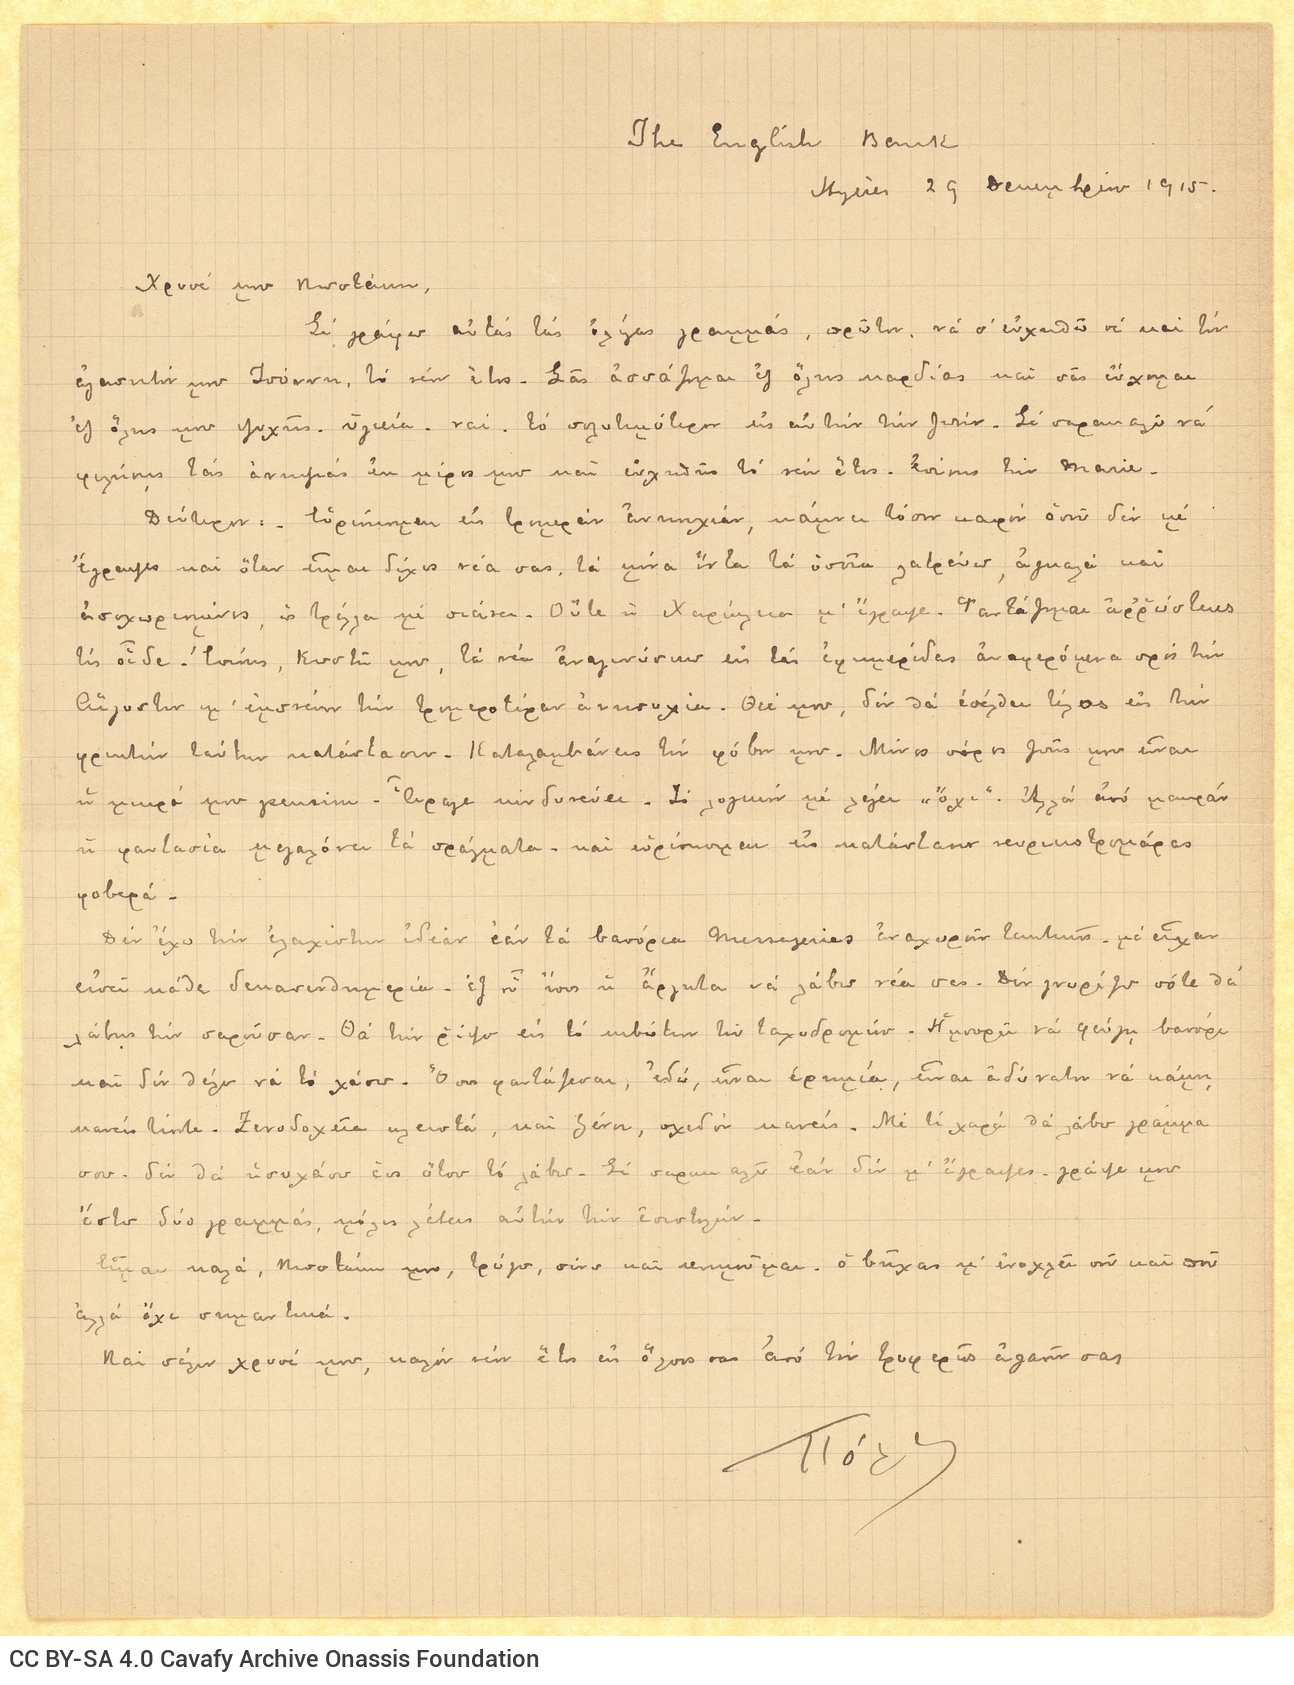 Handwritten letter by Paul Cavafy to C. P. Cavafy from Hyères, France. He expresses his worry about the interruption of the 